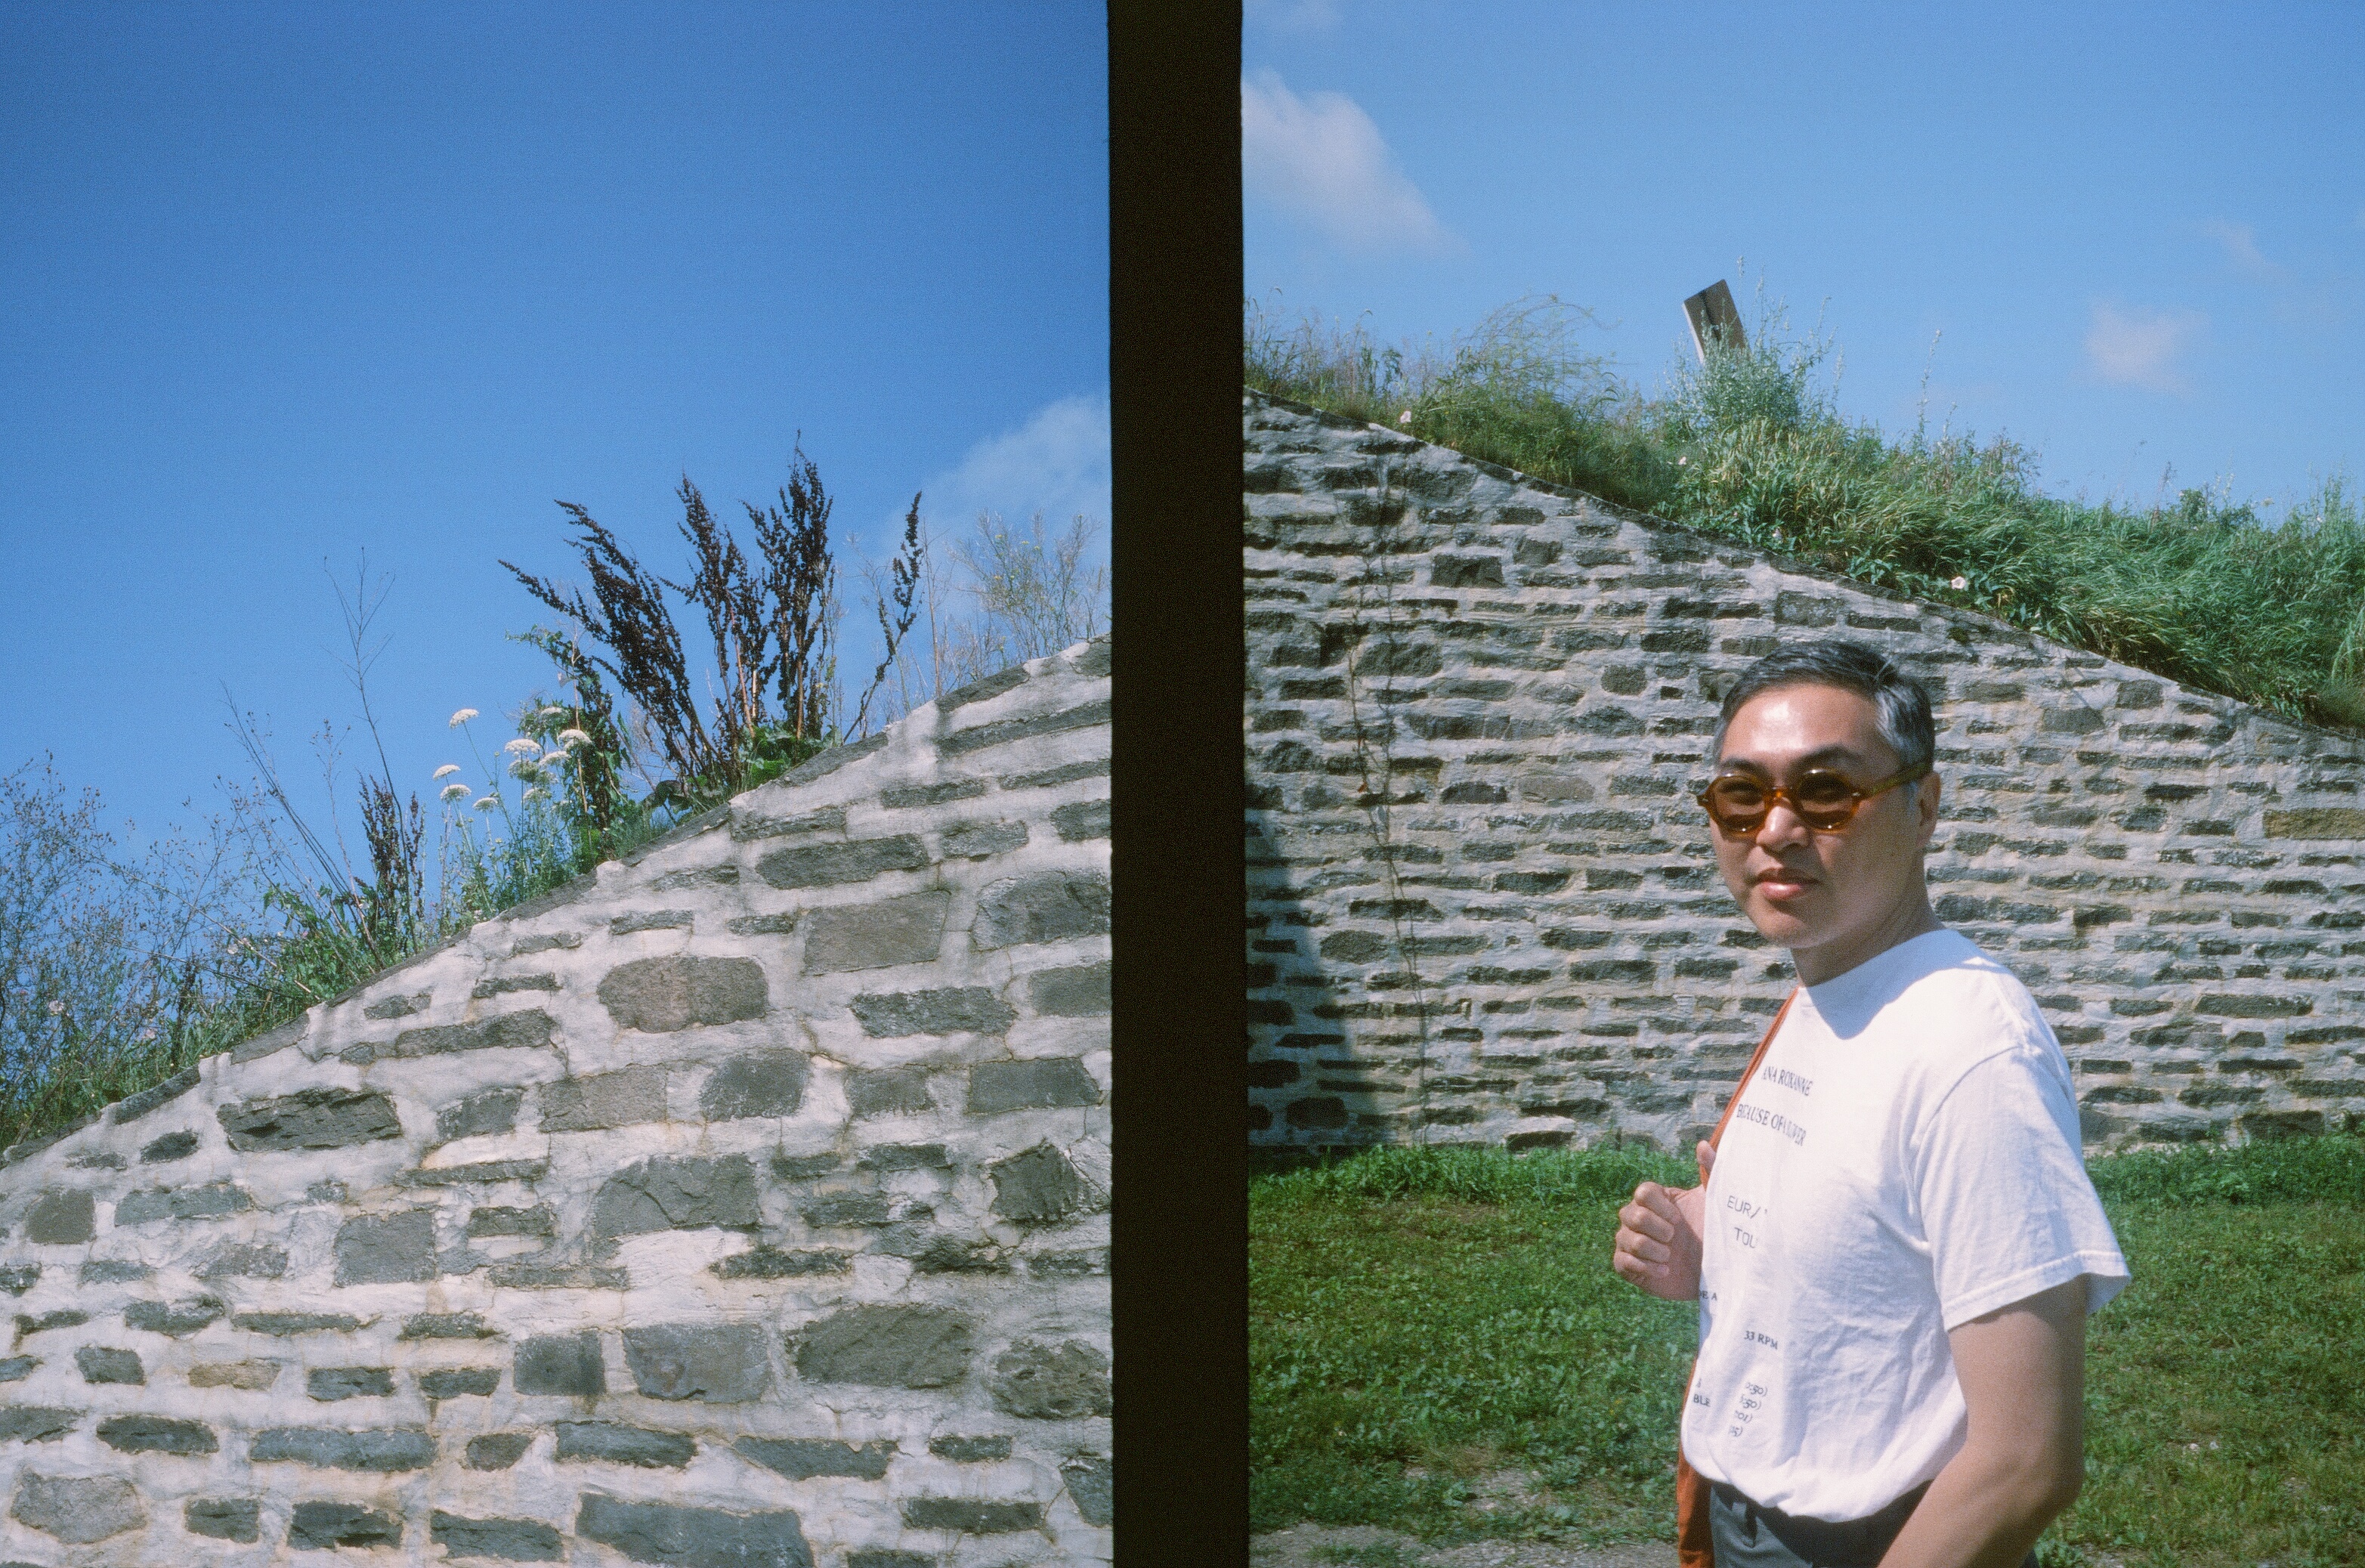 someone wearing sunglasses stands next to a stone wall